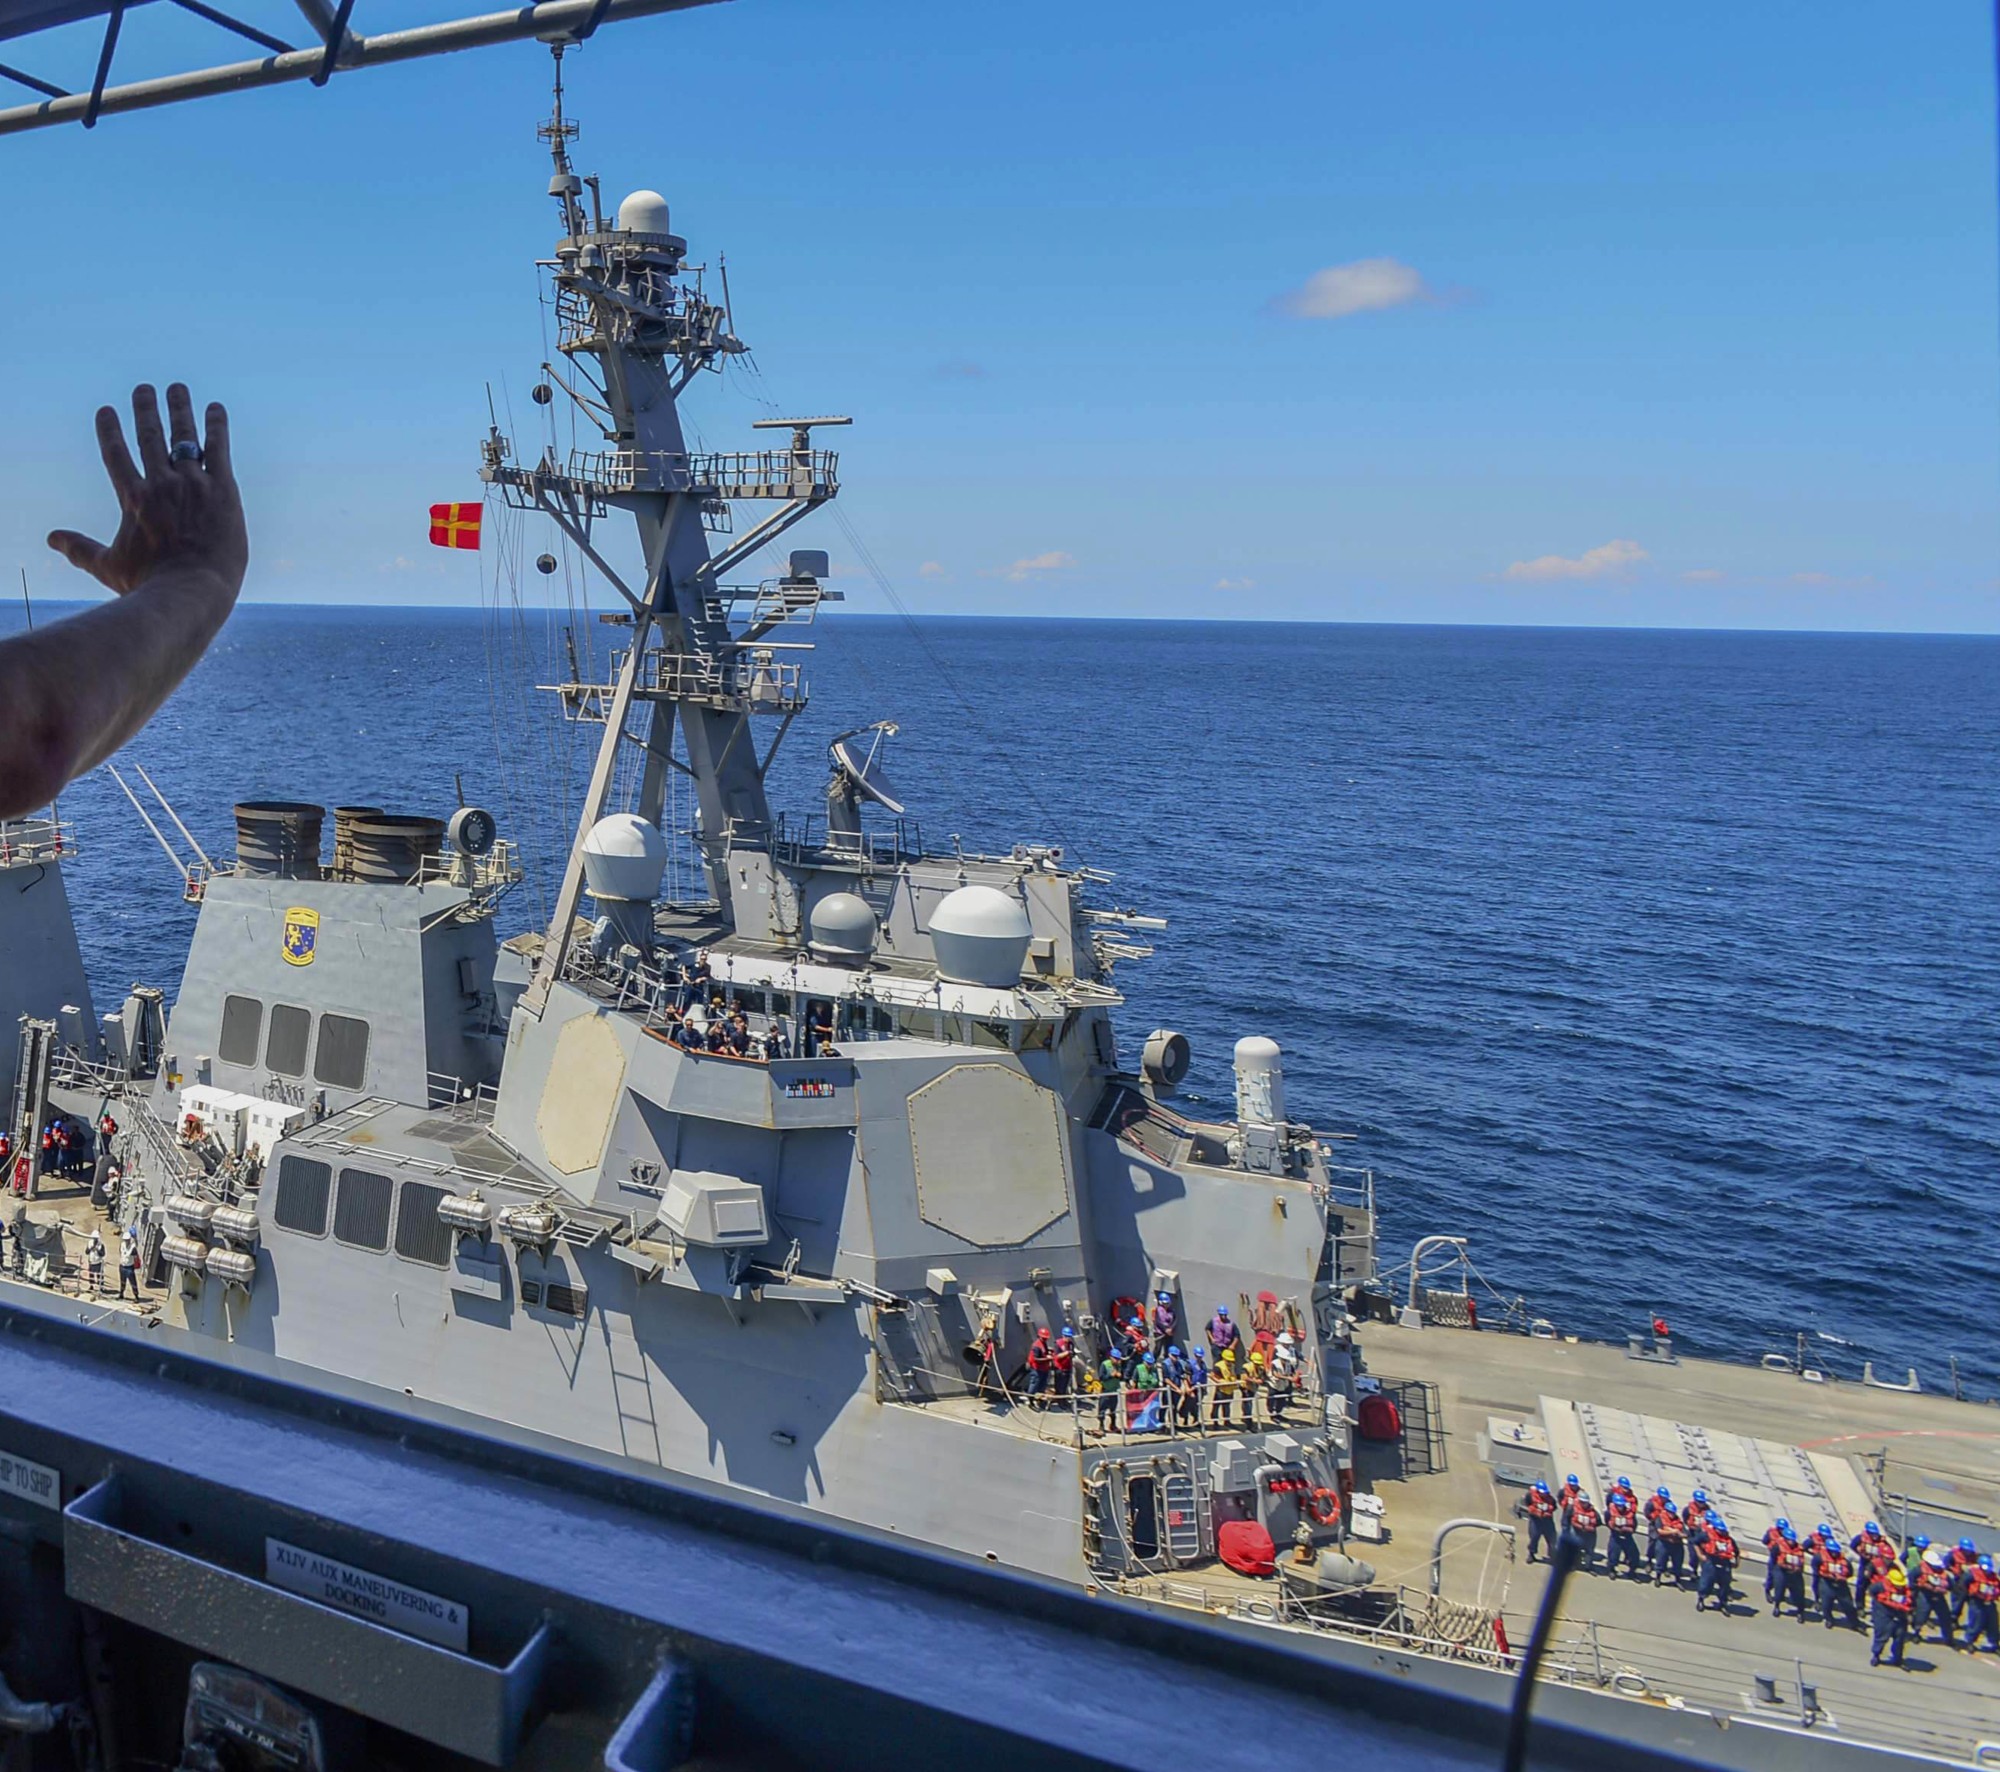 ddg-73 uss decatur guided missile destroyer arleigh burke class aegis bmd 50 replenishment at sea ras